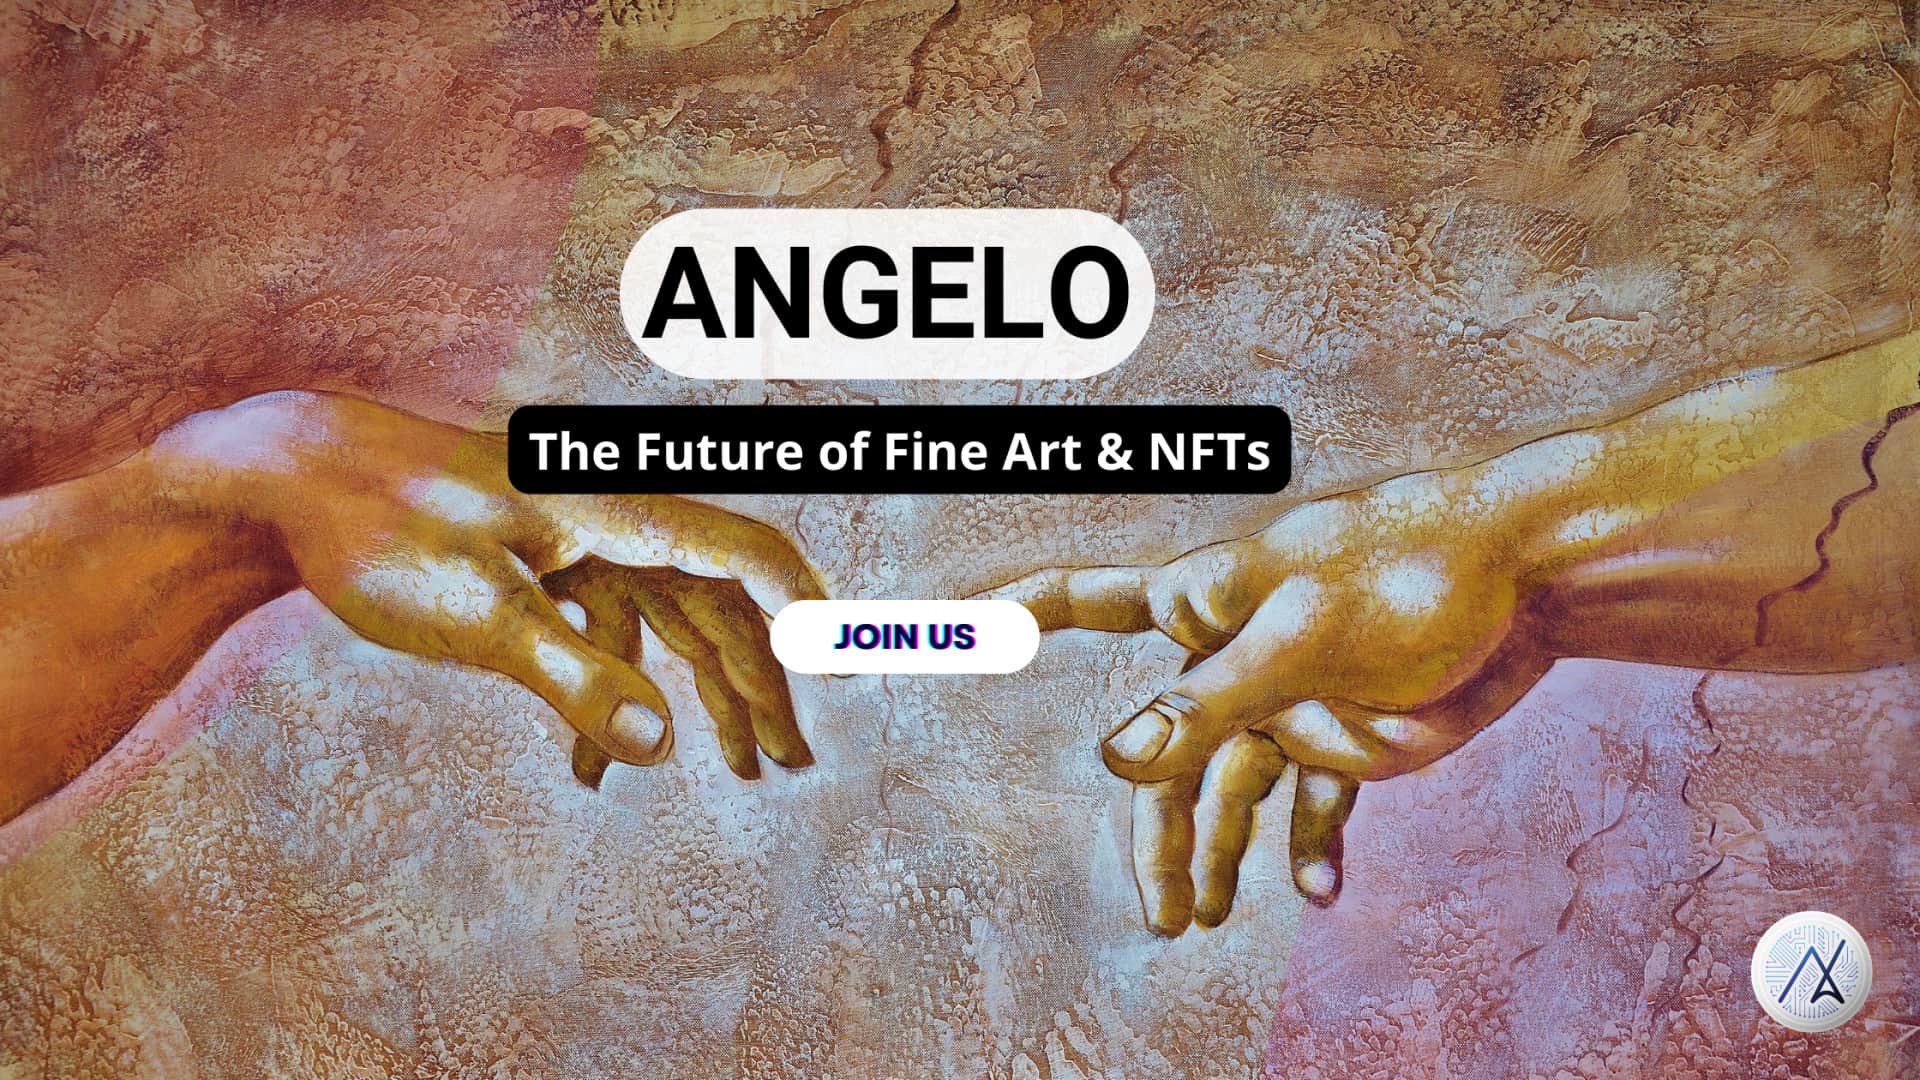 Web3-platform-angelo-prepares-to-reimagine-physical-art-collection